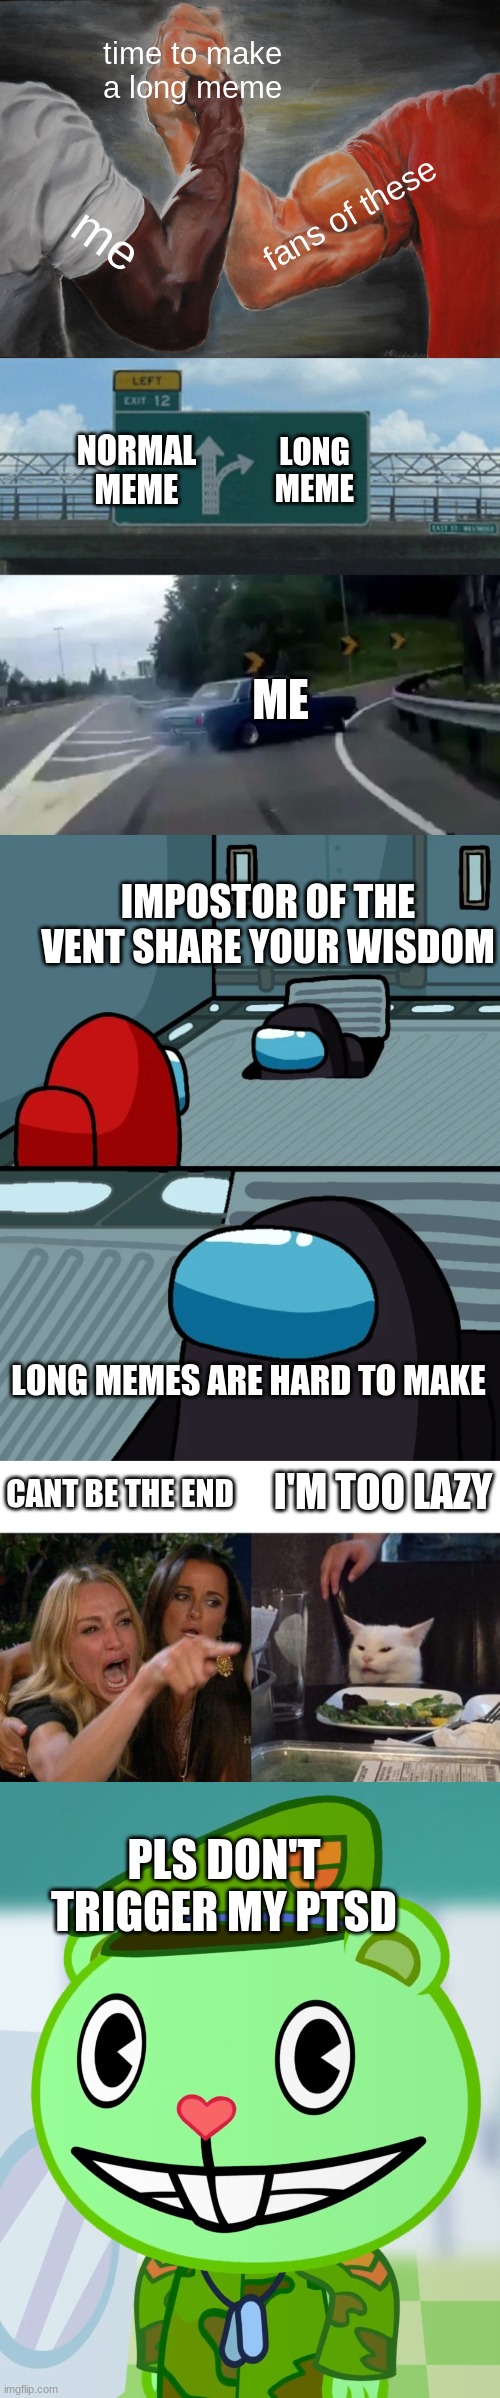 i do not have ptsd | time to make a long meme; fans of these; me; NORMAL MEME; LONG MEME; ME; IMPOSTOR OF THE VENT SHARE YOUR WISDOM; LONG MEMES ARE HARD TO MAKE; I'M TOO LAZY; CANT BE THE END; PLS DON'T TRIGGER MY PTSD | image tagged in memes,epic handshake,left exit 12 off ramp,impostor of the vent,woman yelling at cat,flippy smiles htf | made w/ Imgflip meme maker